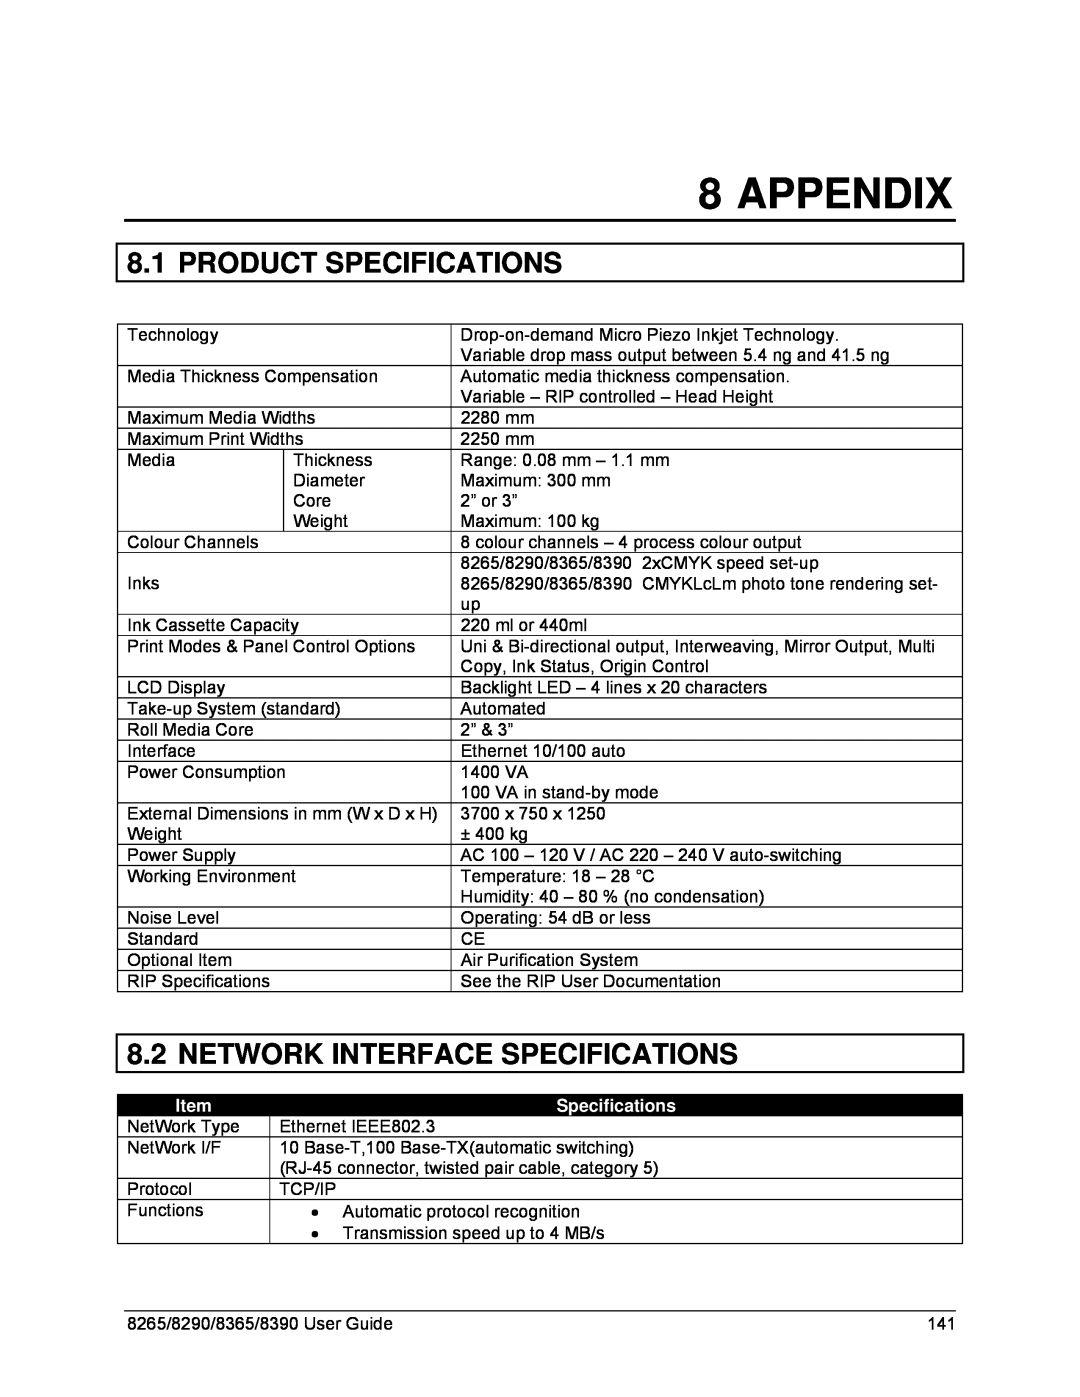 Xerox 8265, 8290, 8390, 8365 manual Appendix, Product Specifications, Network Interface Specifications 